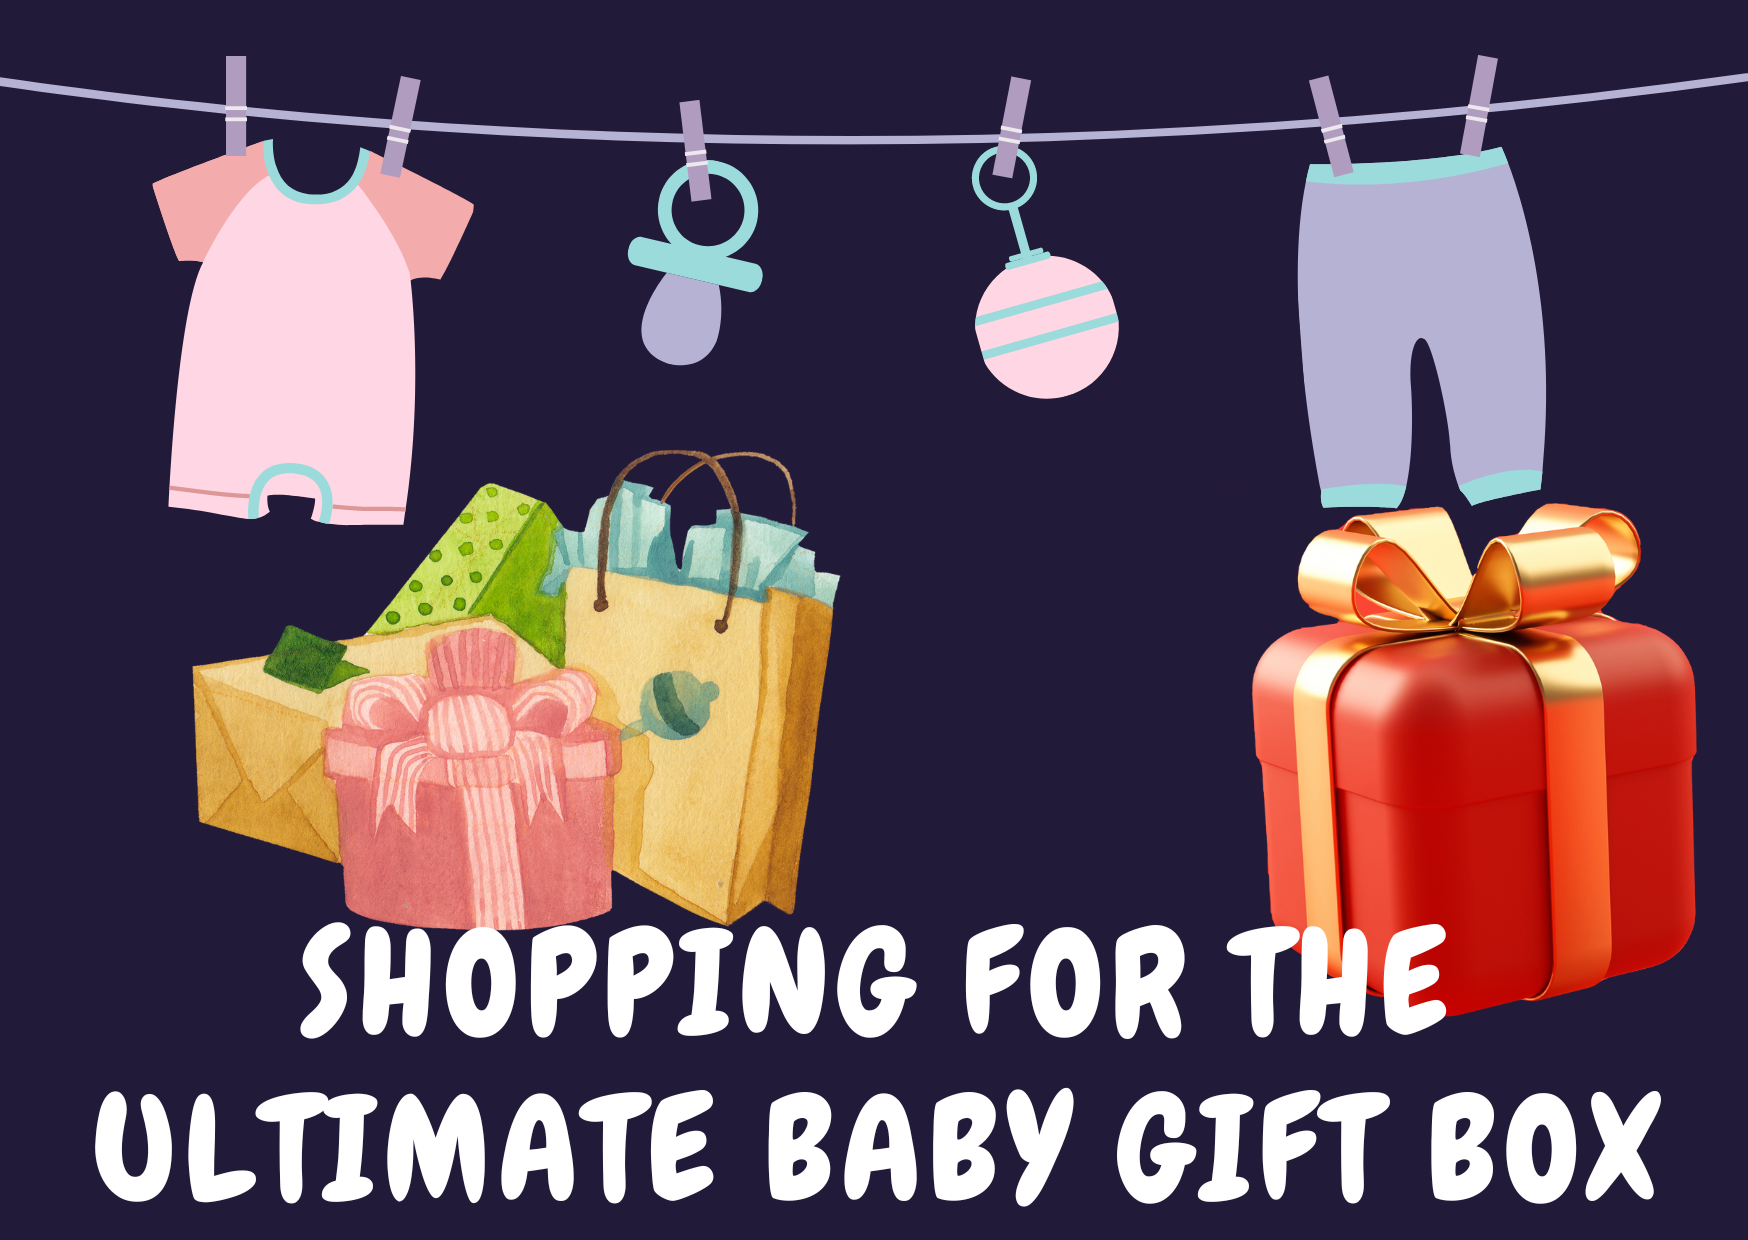 Shopping for the Ultimate Baby Gift Box